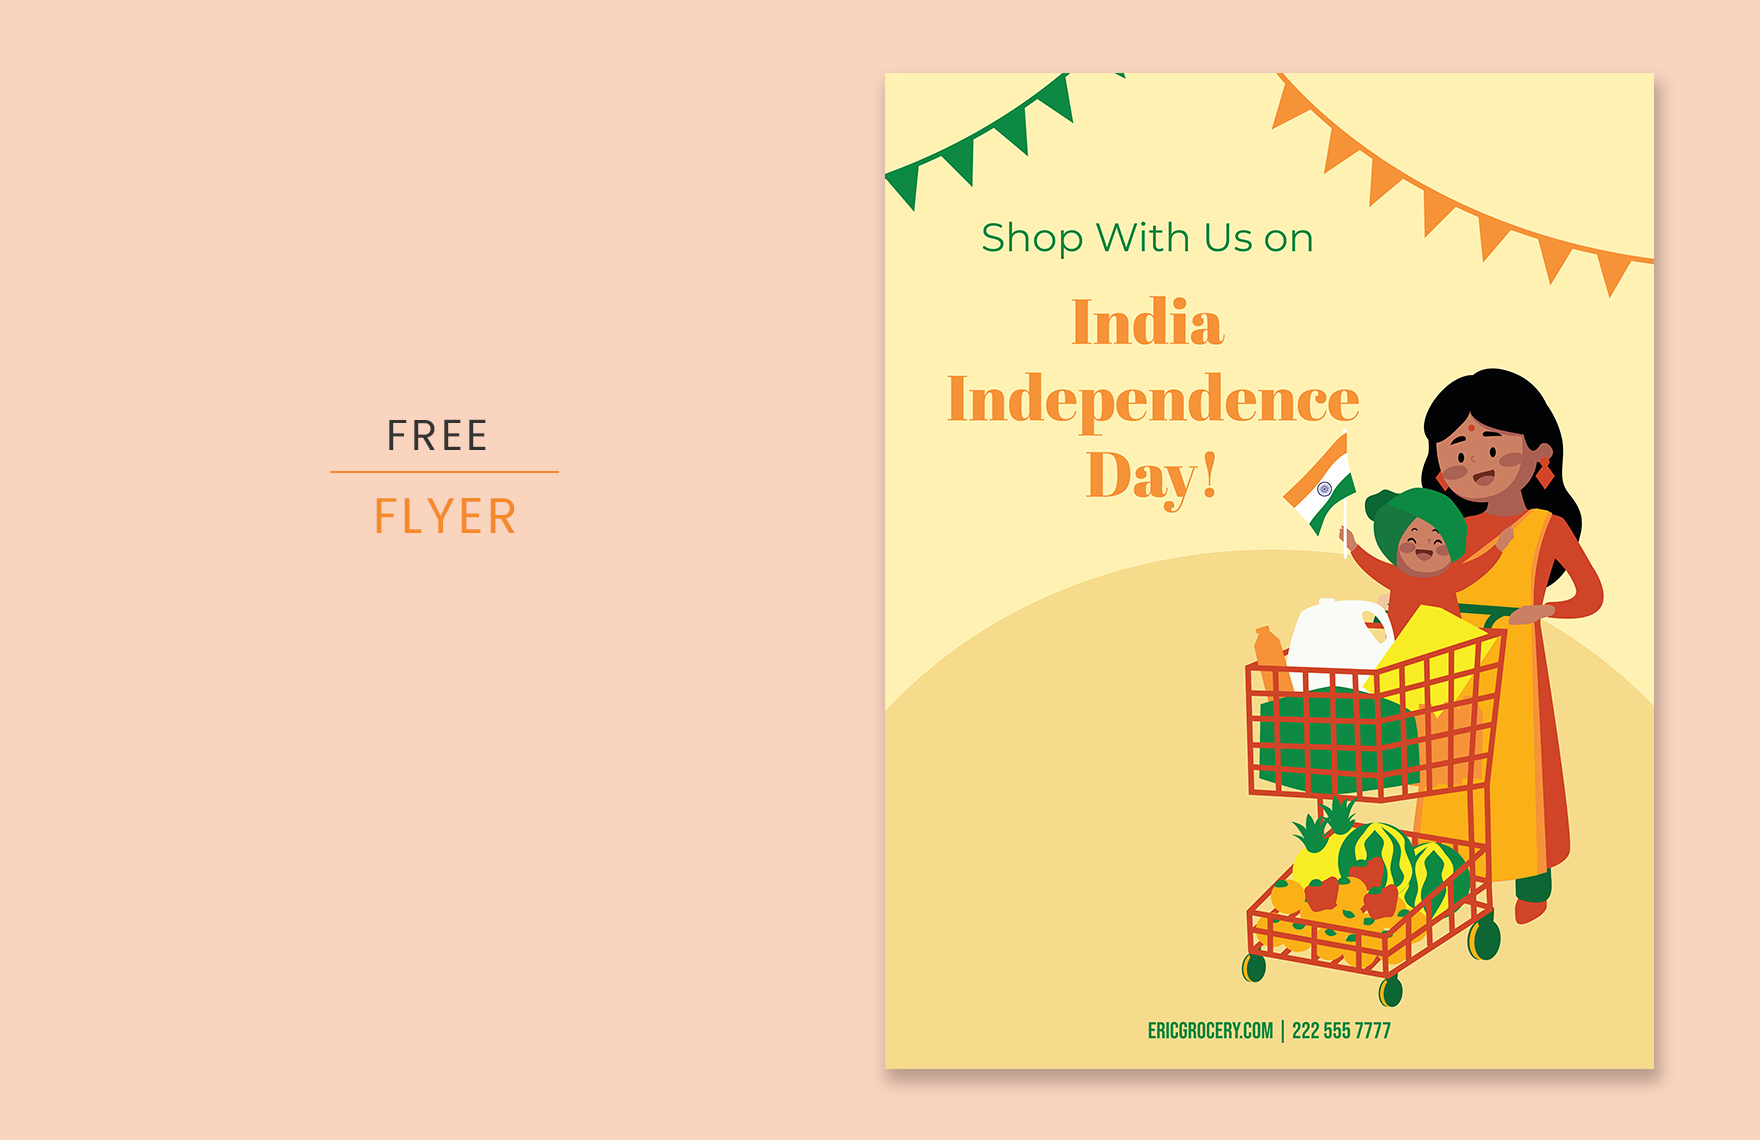 Free India Independence Day Flyer Template in PDF, Illustrator, SVG, JPEG